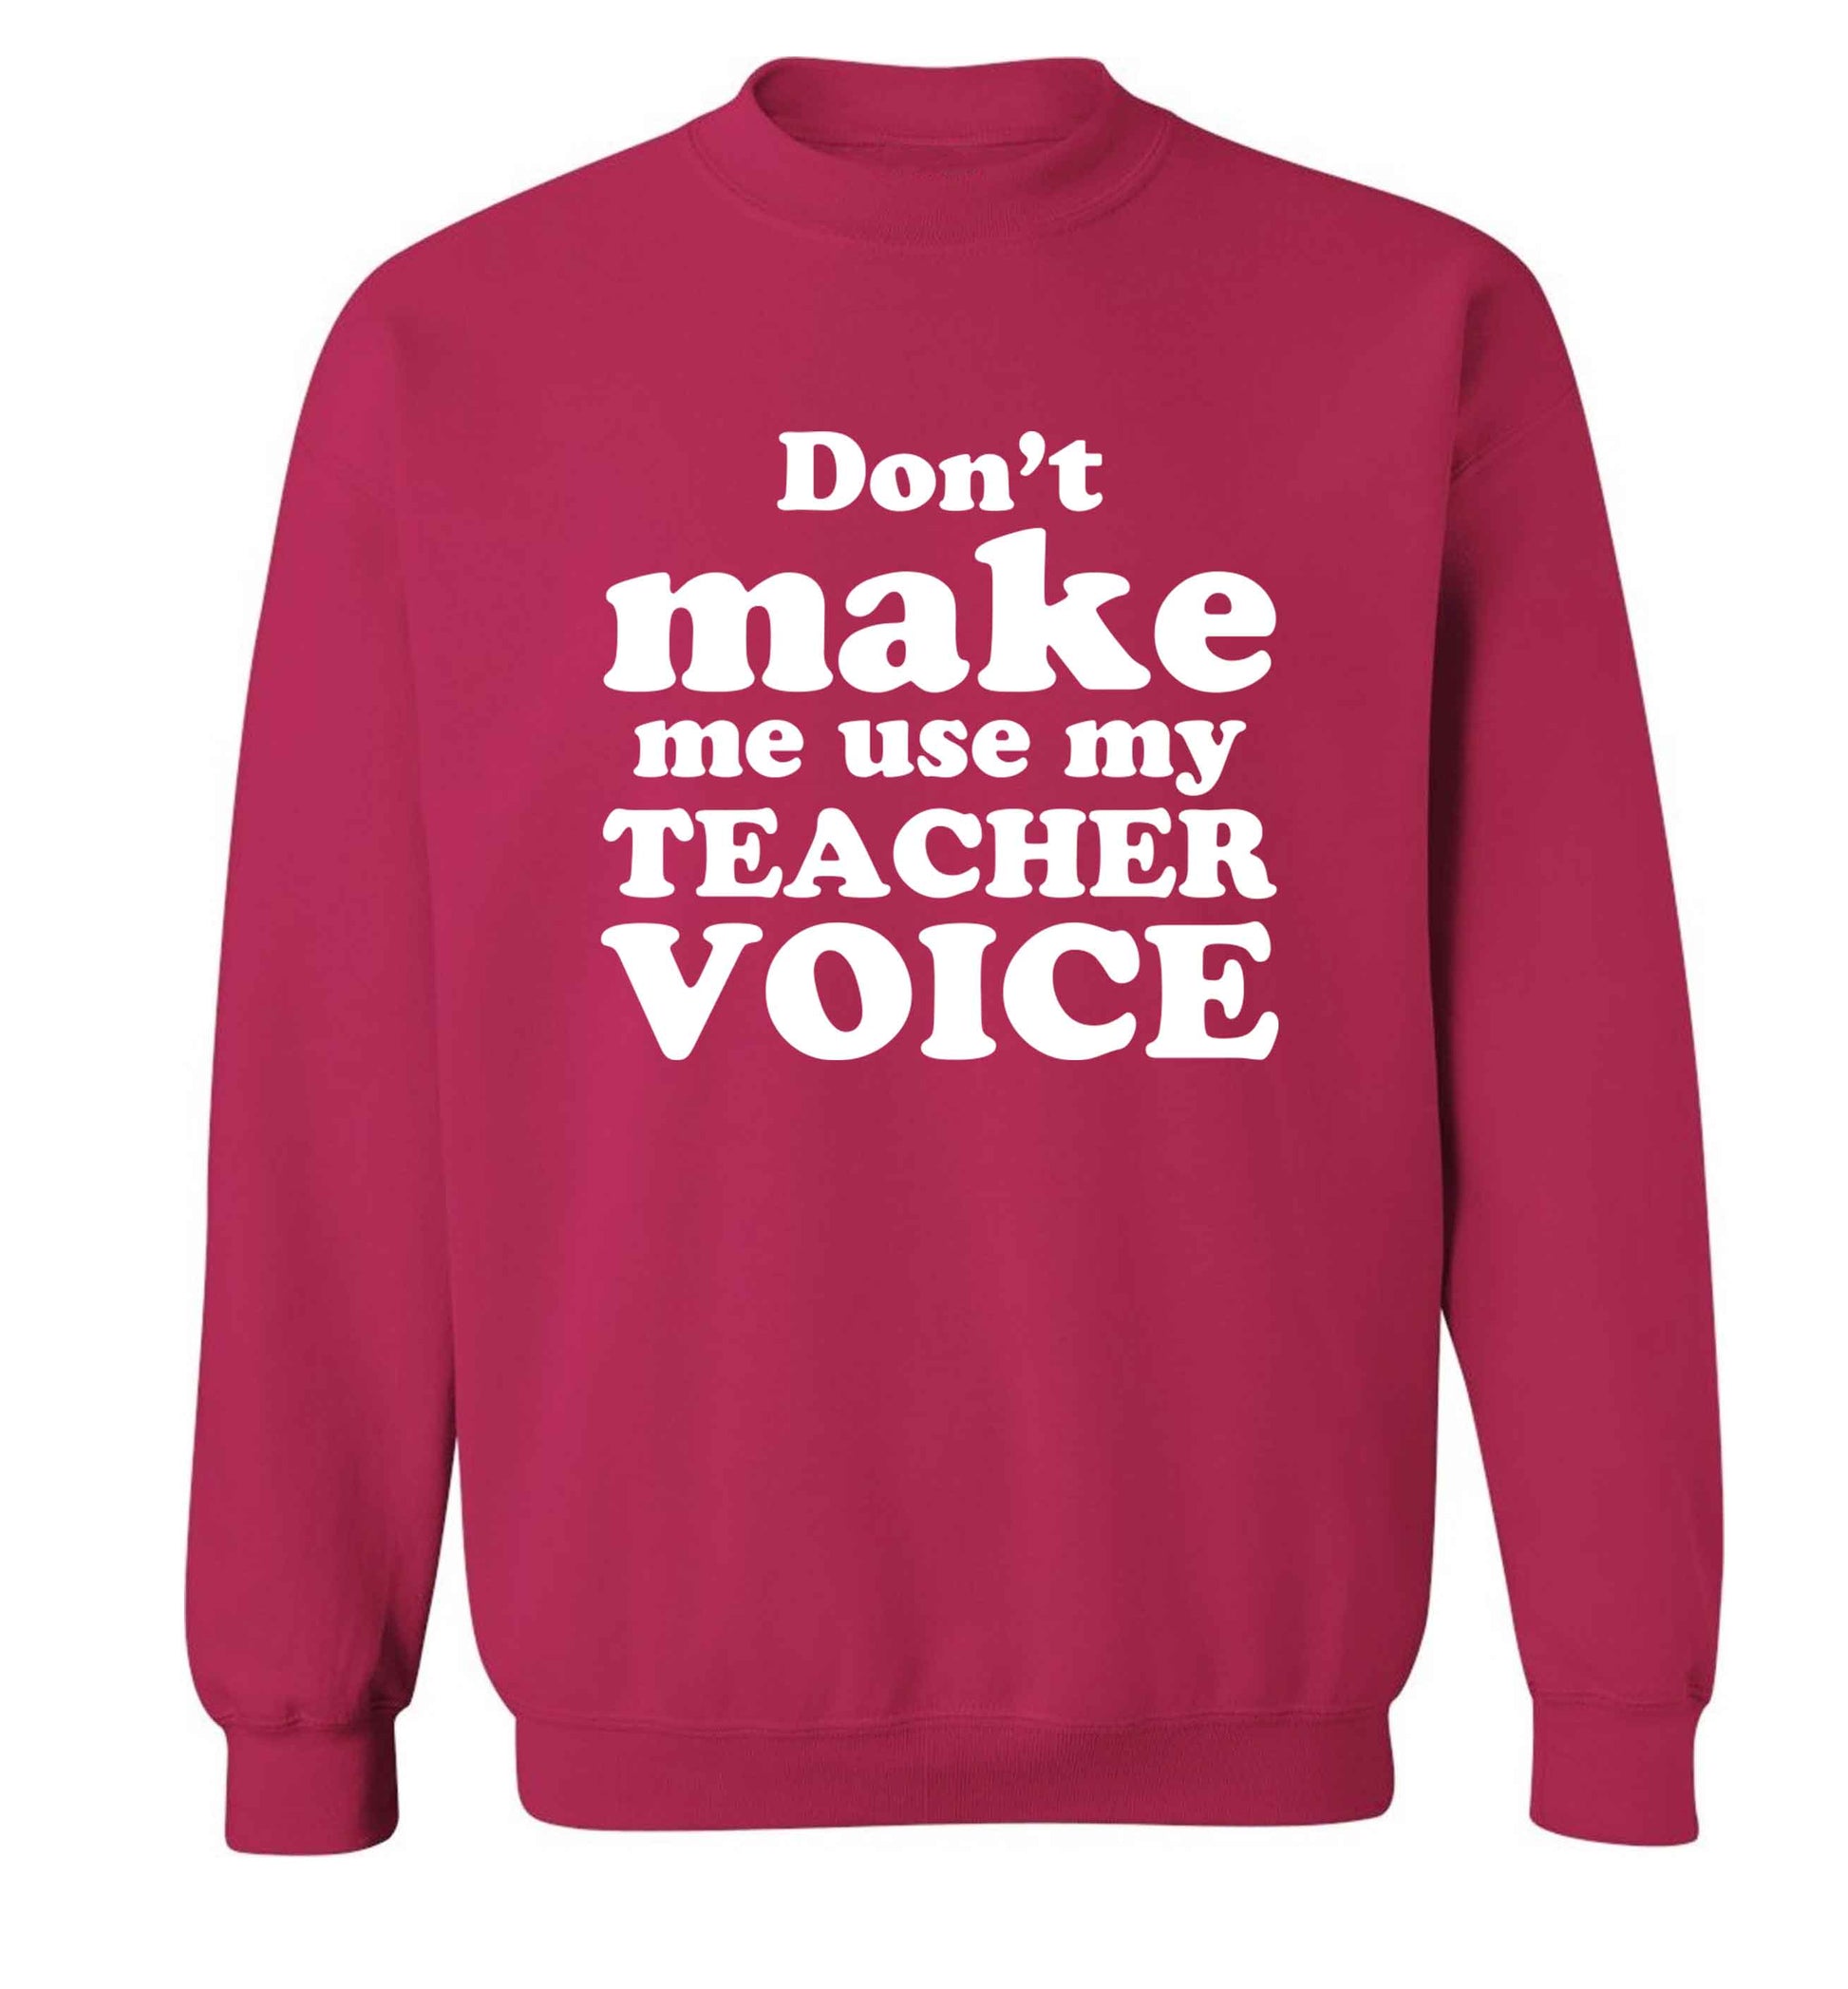 Don't make me use my teacher voice adult's unisex pink sweater 2XL